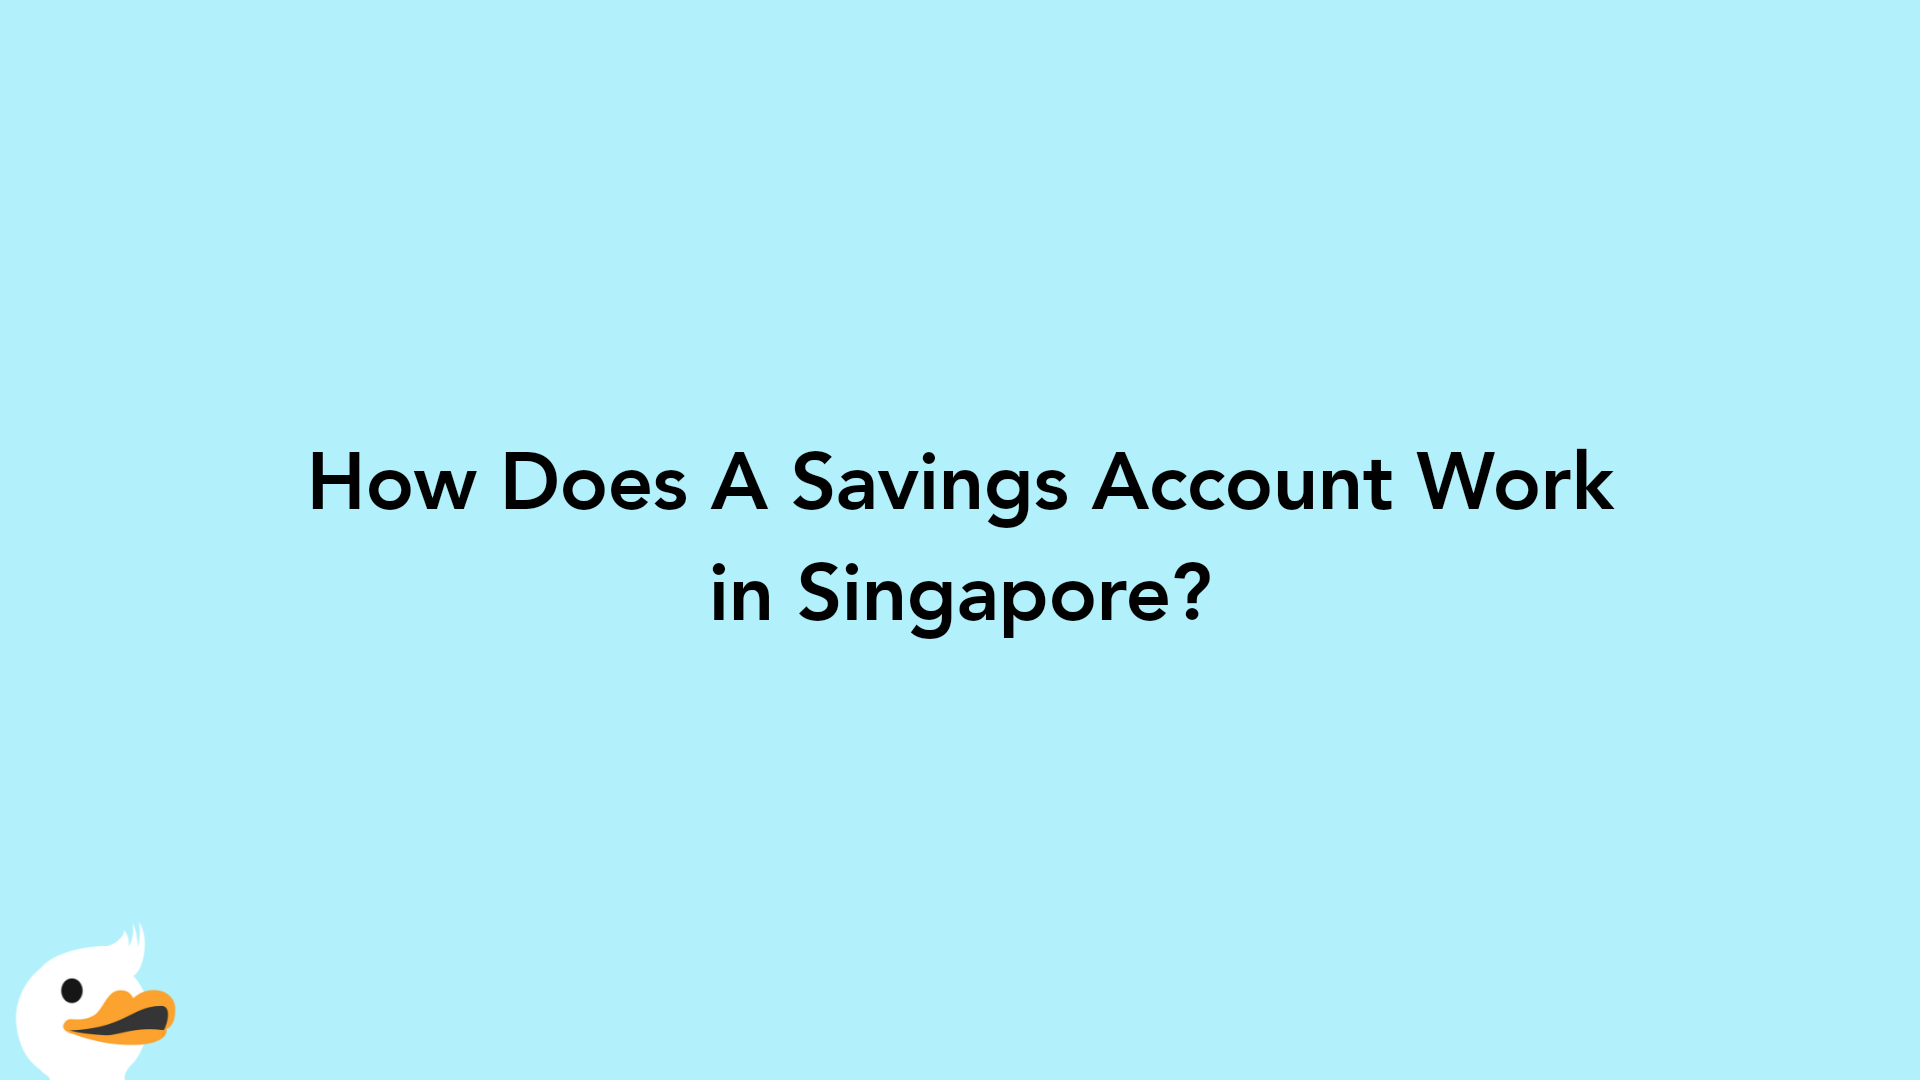 How Does A Savings Account Work in Singapore?